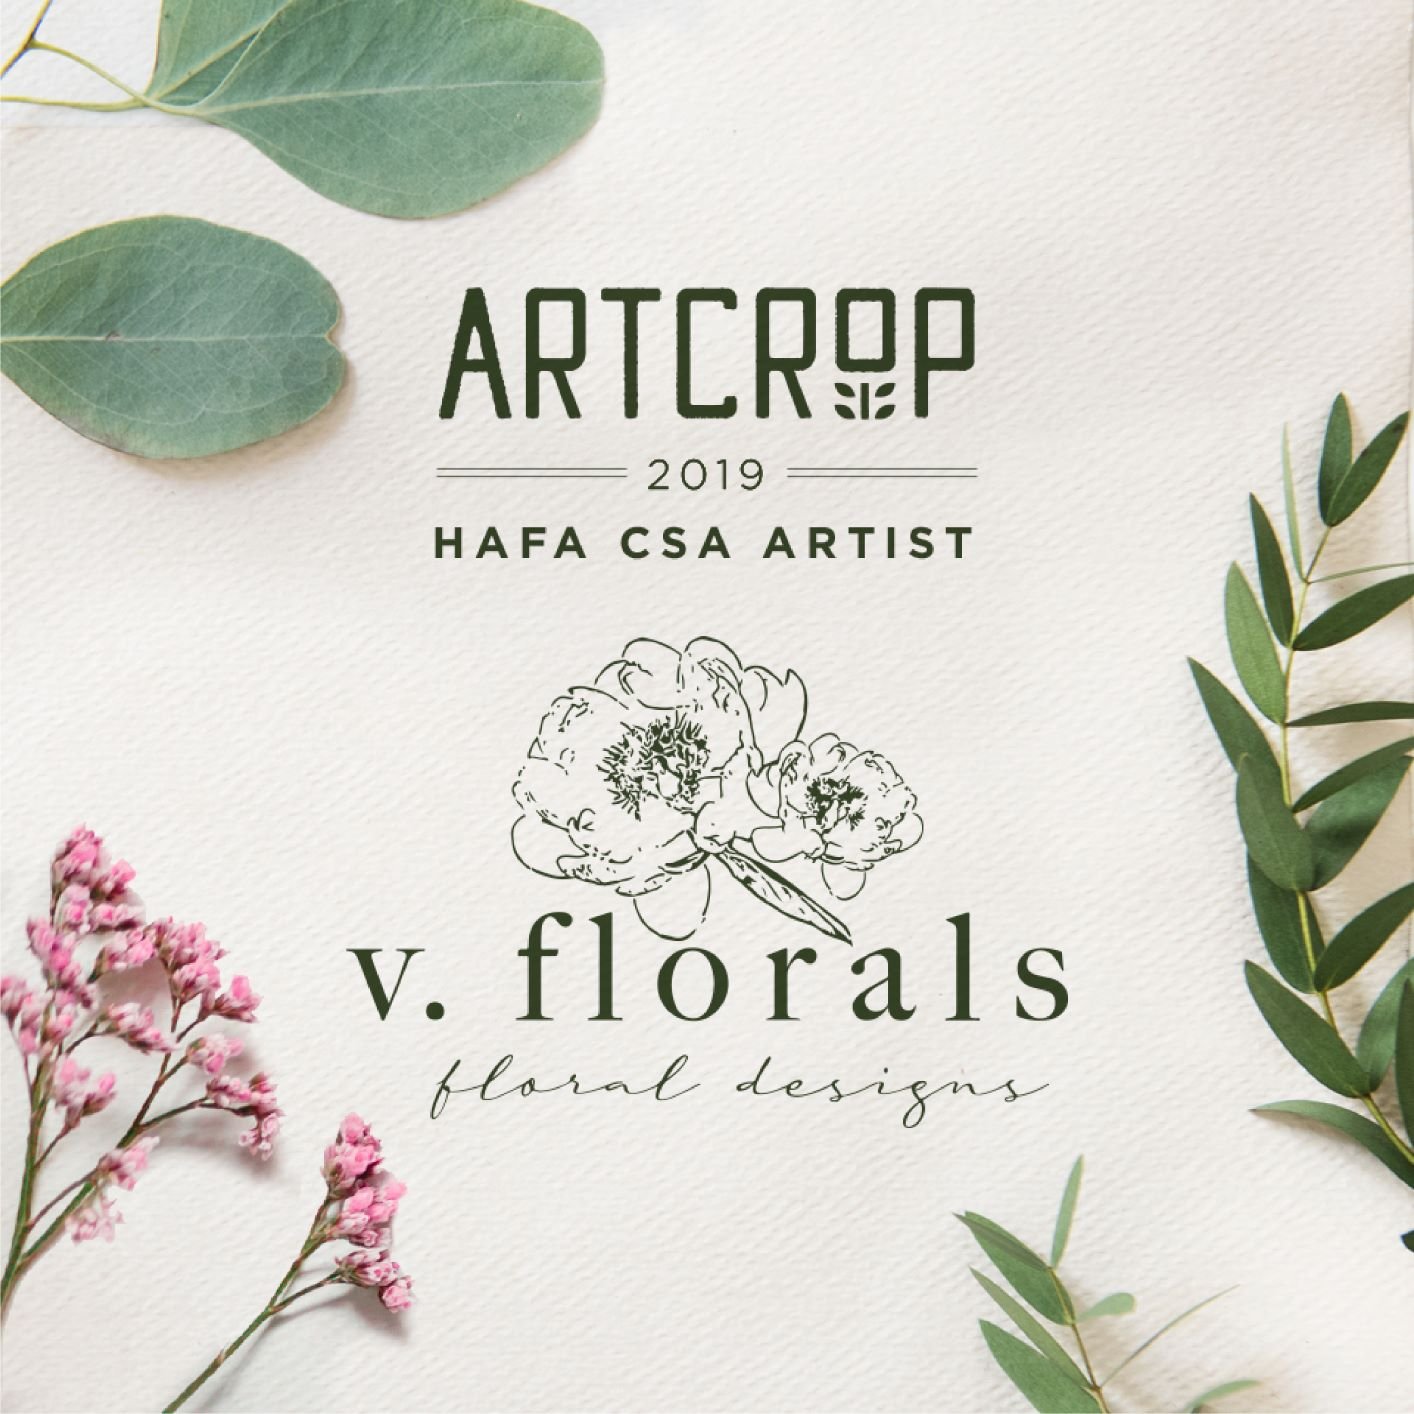 ArtCrop: crafted by the hands of farmers and artists